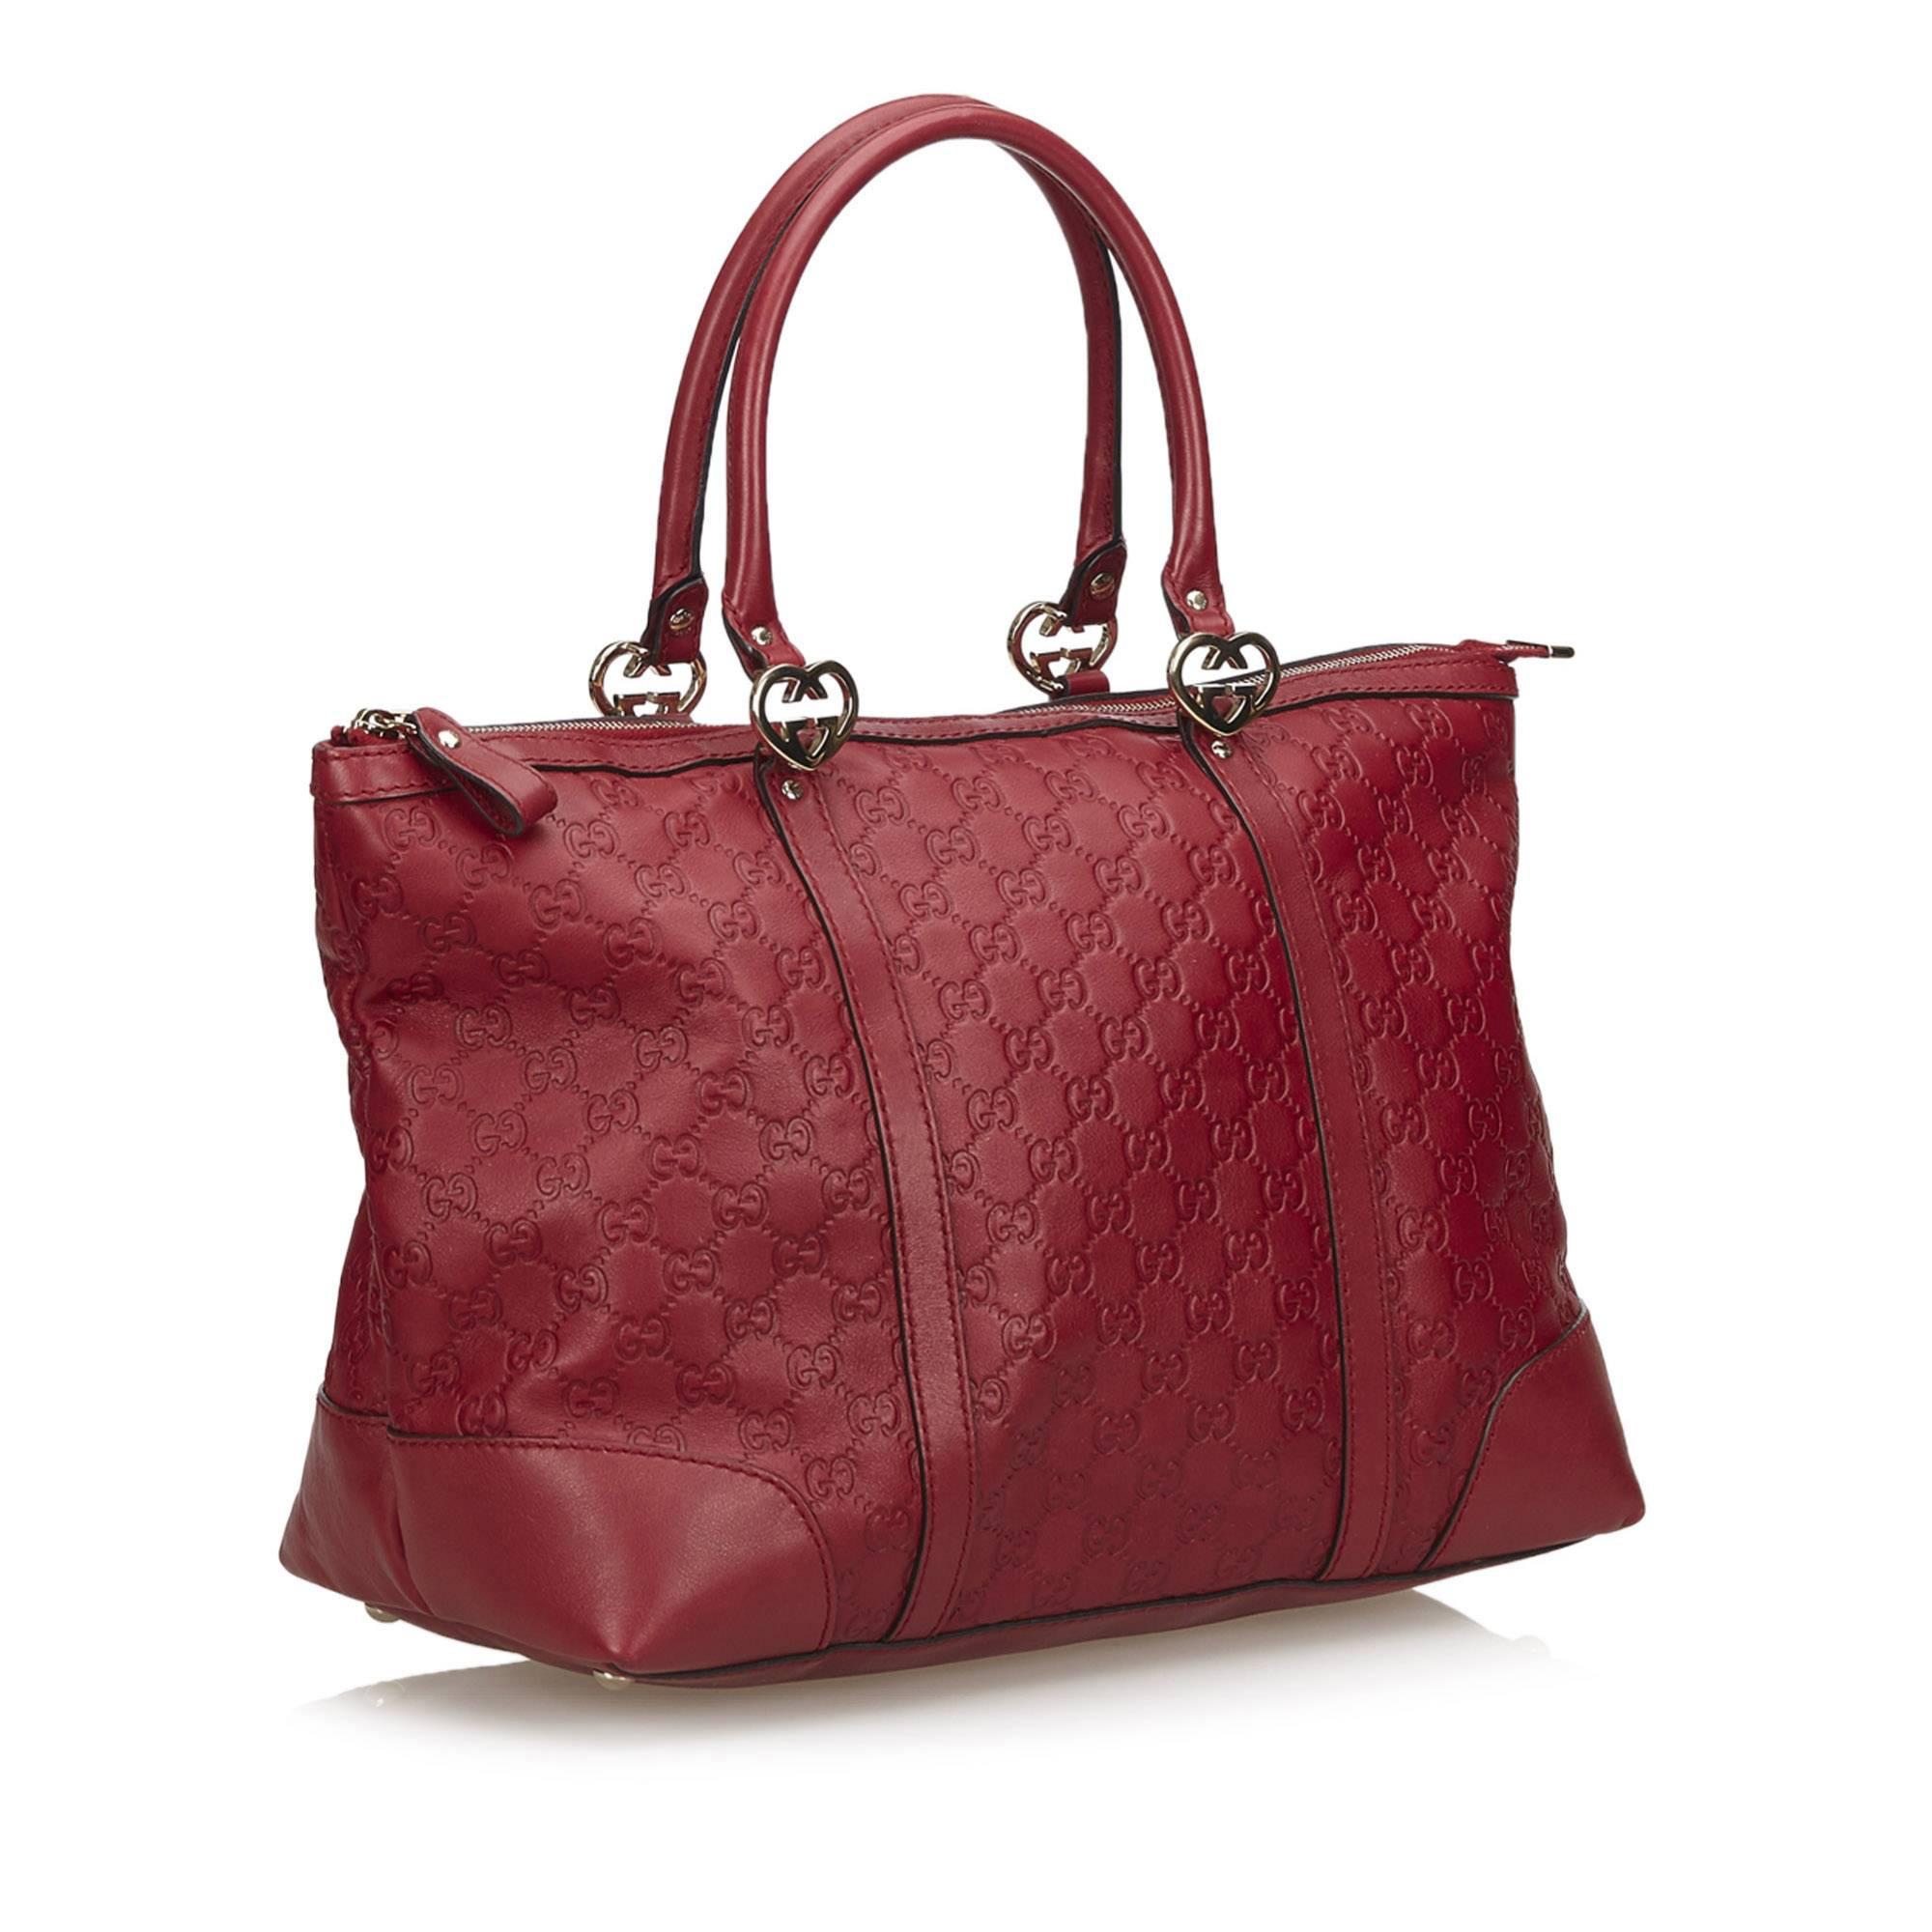 This tote bag features a leather body, rolled leather handles, top zip closure, and interior zip and slip pockets. 

It carries an AB condition rating.

Dimensions: 
Length 43 cm
Width 30 cm
Depth 19 cm
Hand Drop 14 cm

Inclusions: Dust Bag

Color: